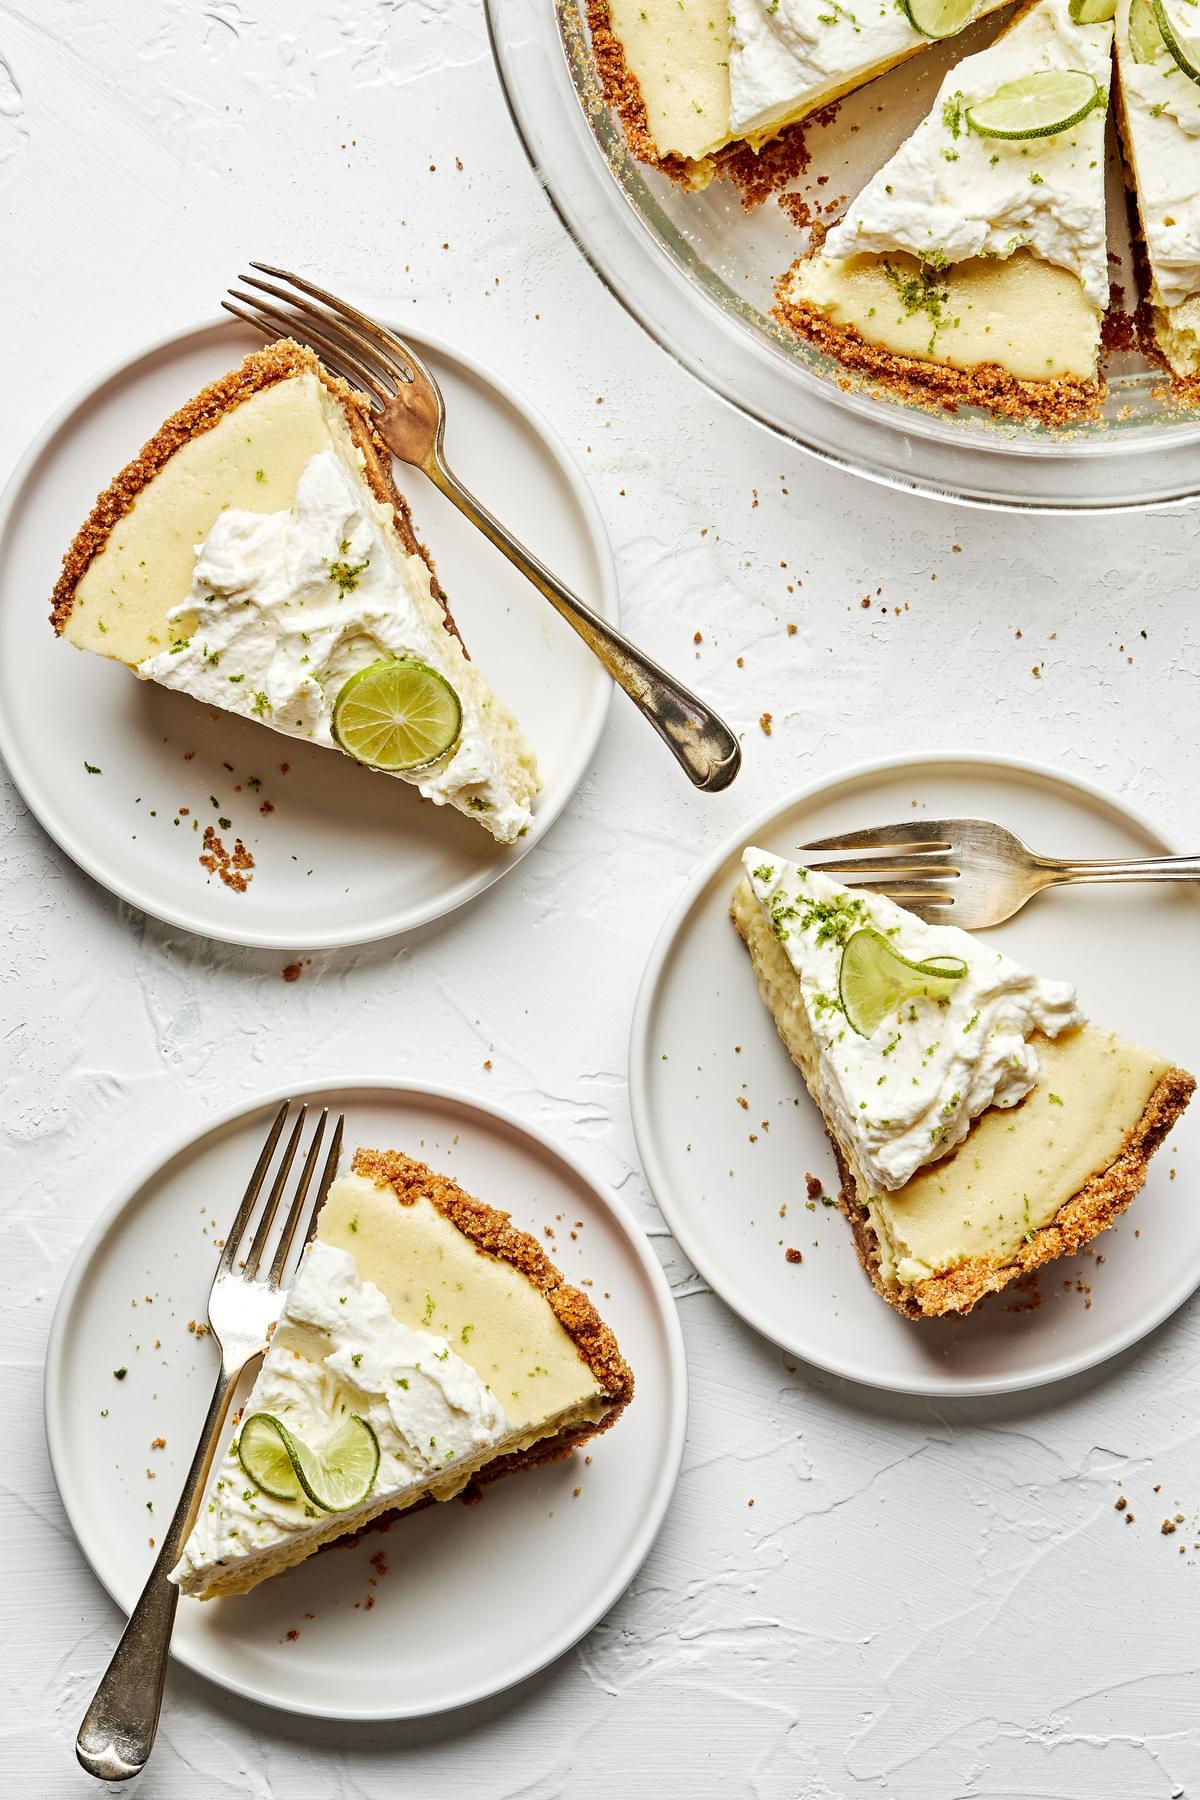 slices of homemade key lime pie on plates with graham cracker crust and topped with whip cream and slices of key lime